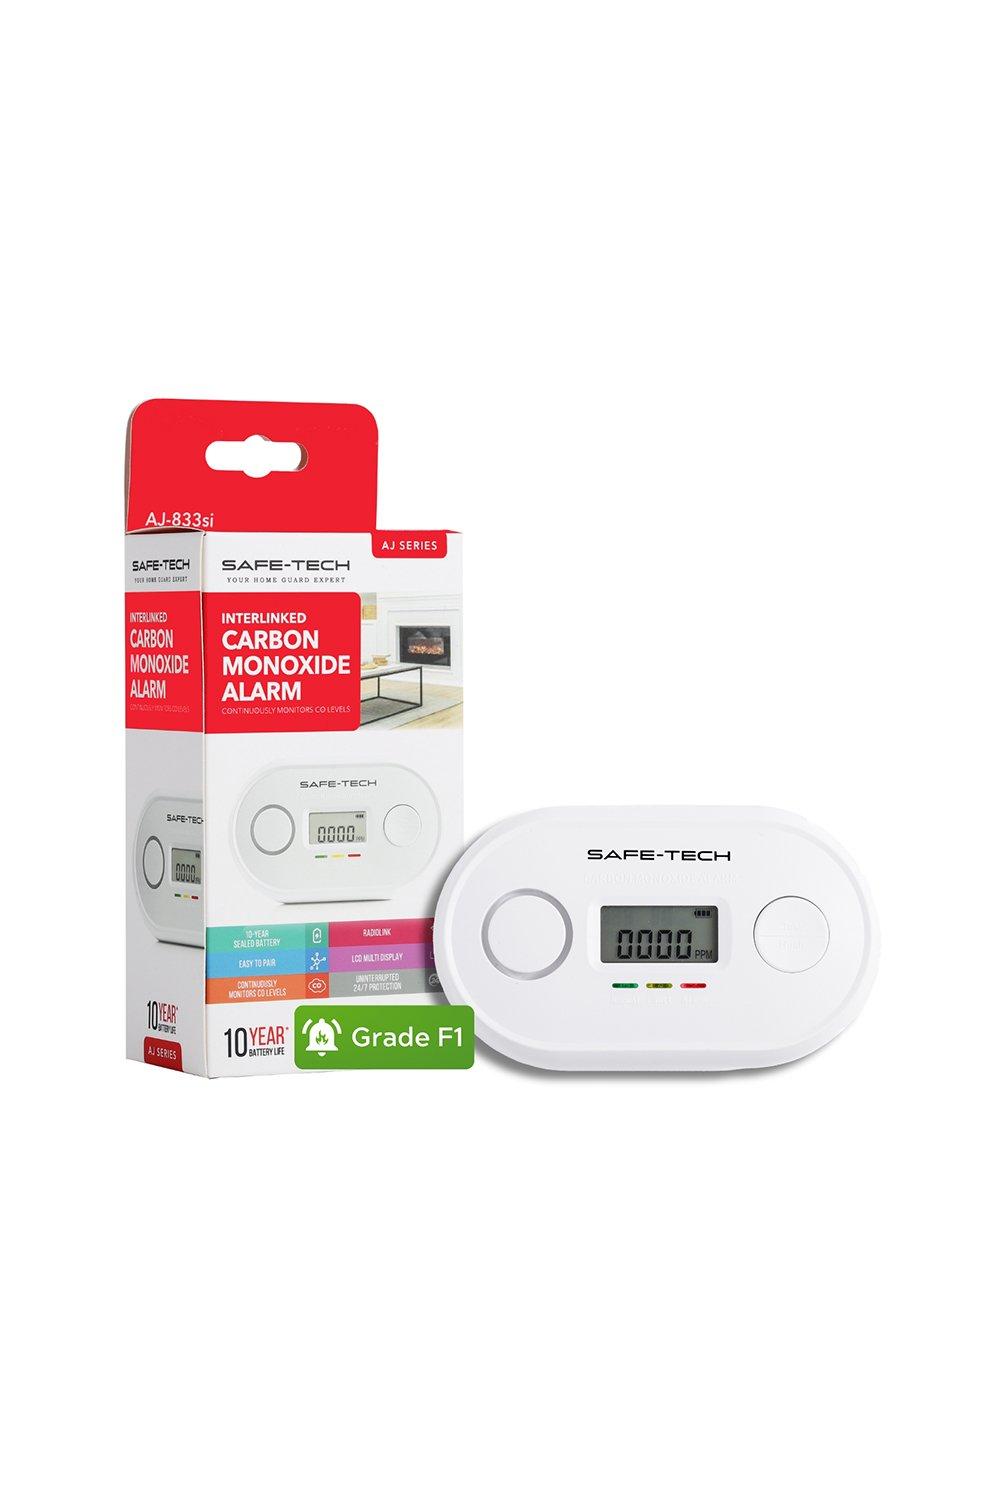 Interlinked Carbon Monoxide Alarm, 10 Year Tamper-Proof Battery with Digital LCD Display